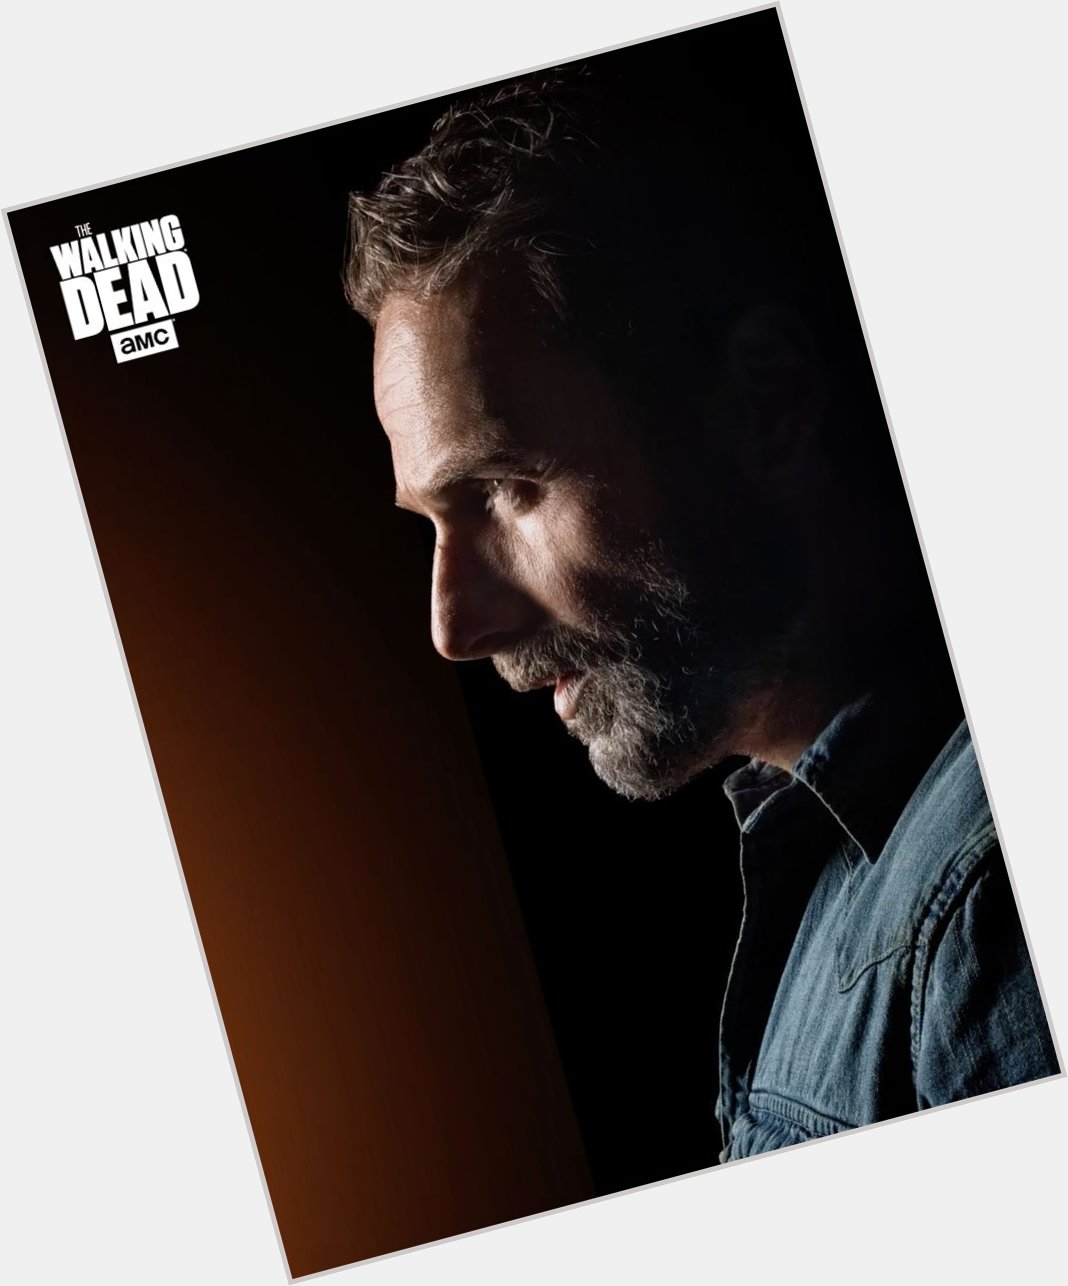 Wishing a very happy birthday to Andrew Lincoln!     